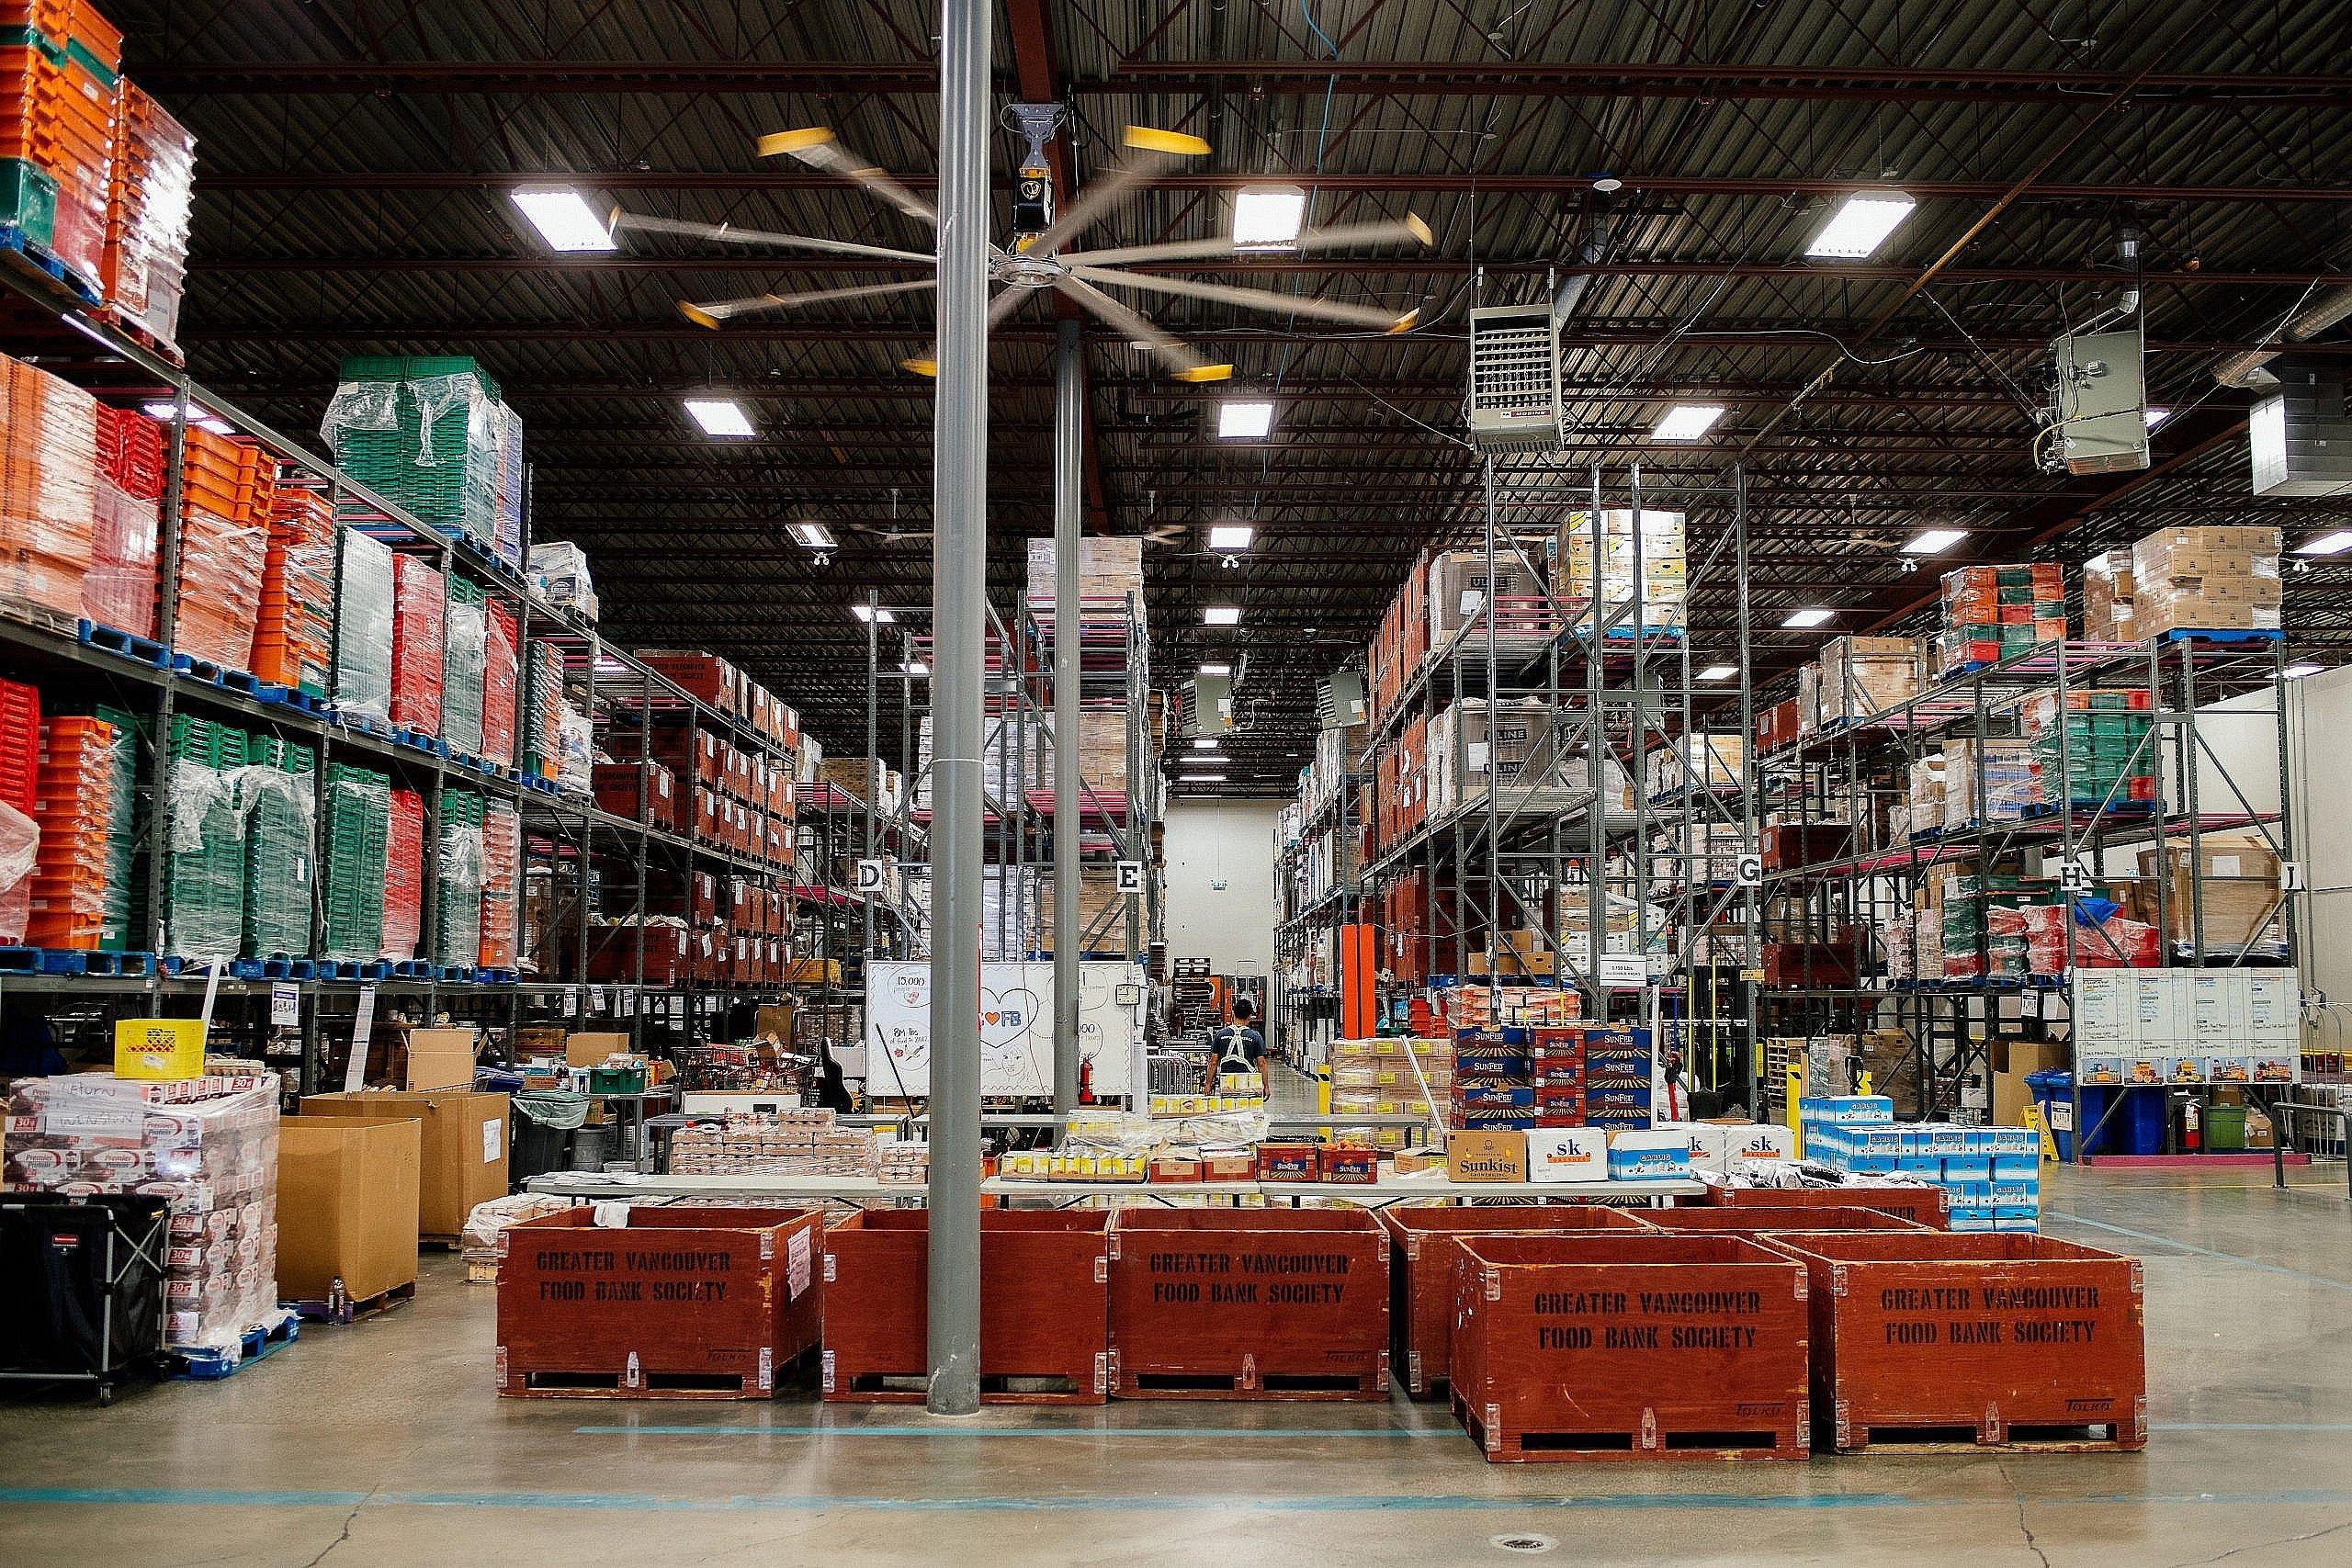 wide angle shot of various containers and shelves in a warehouse stocked with food for a food bank